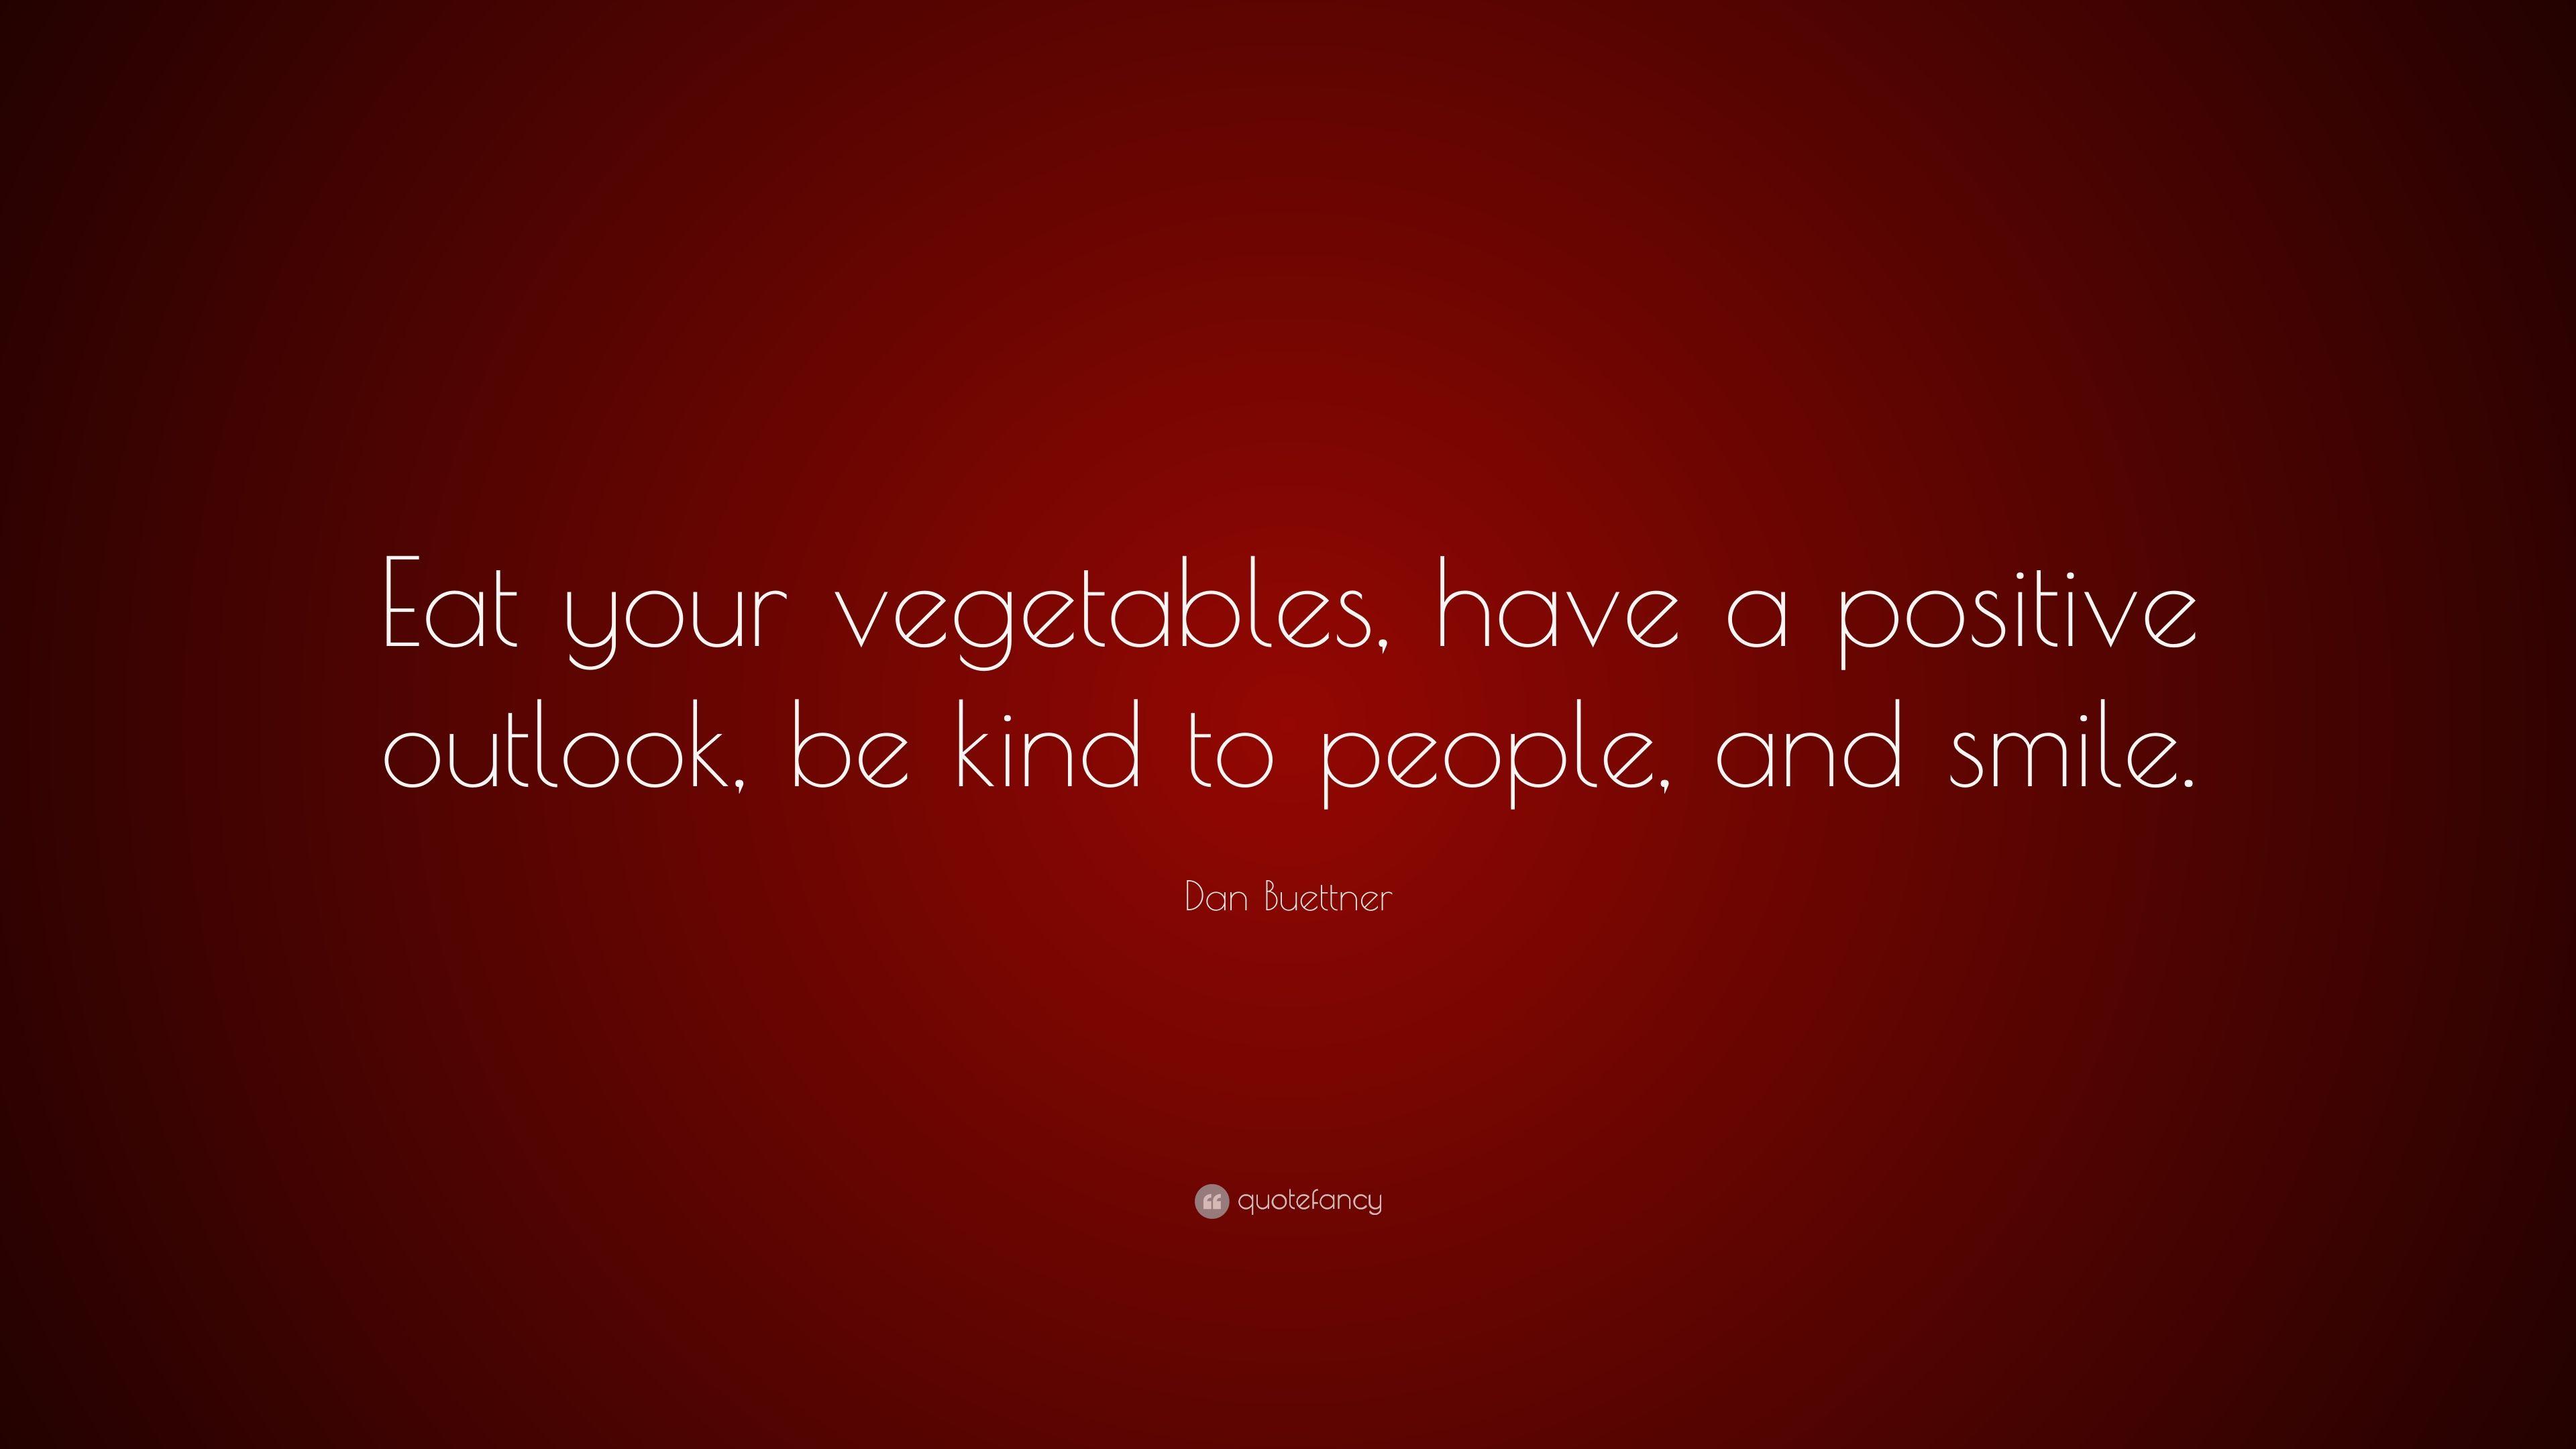 Dan Buettner Quote: “Eat your vegetables, have a positive outlook